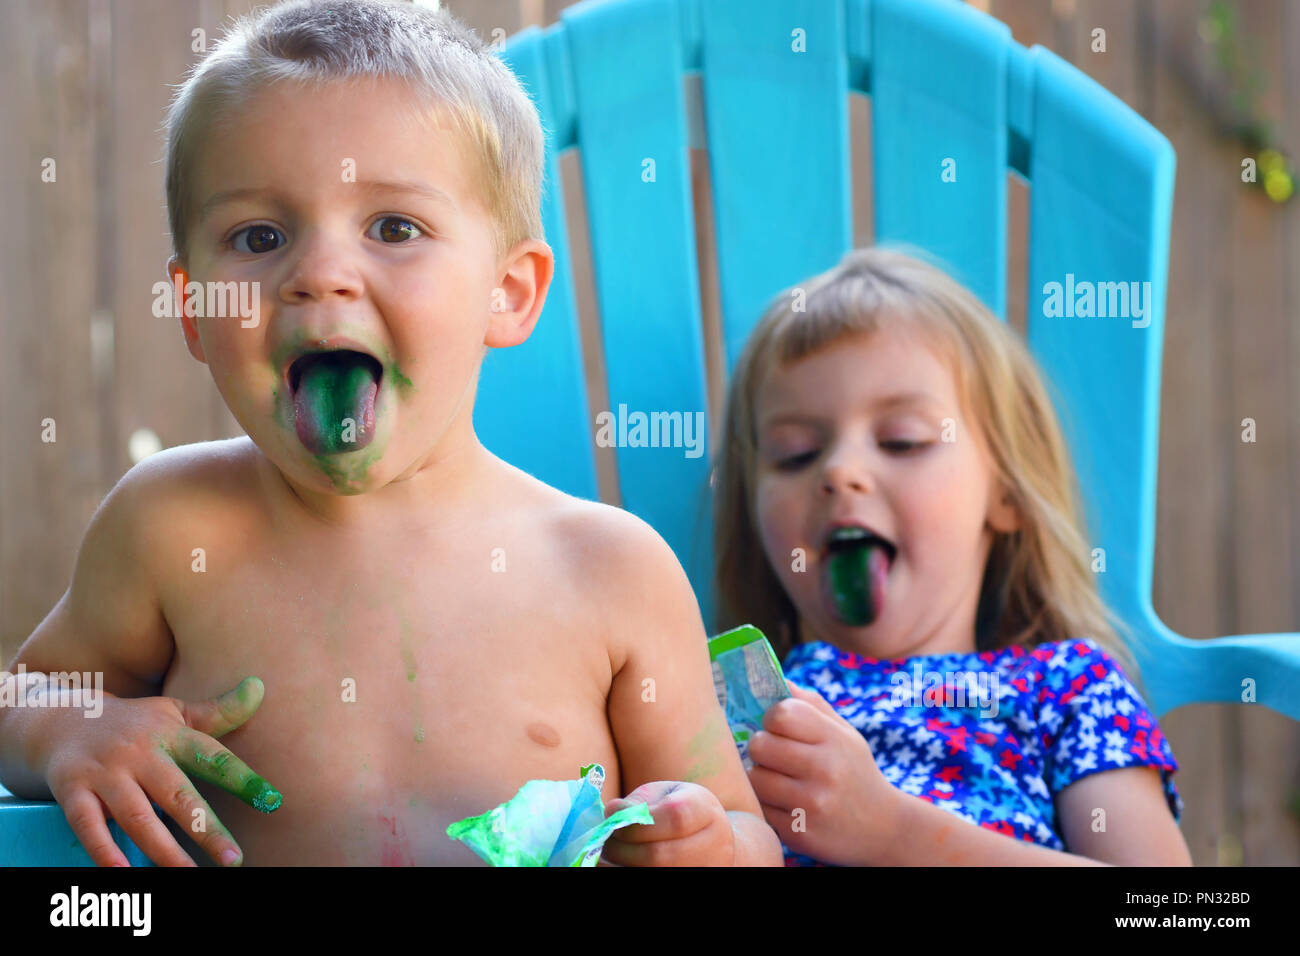 Two toddlers eating candy with blue tongues Stock Photo